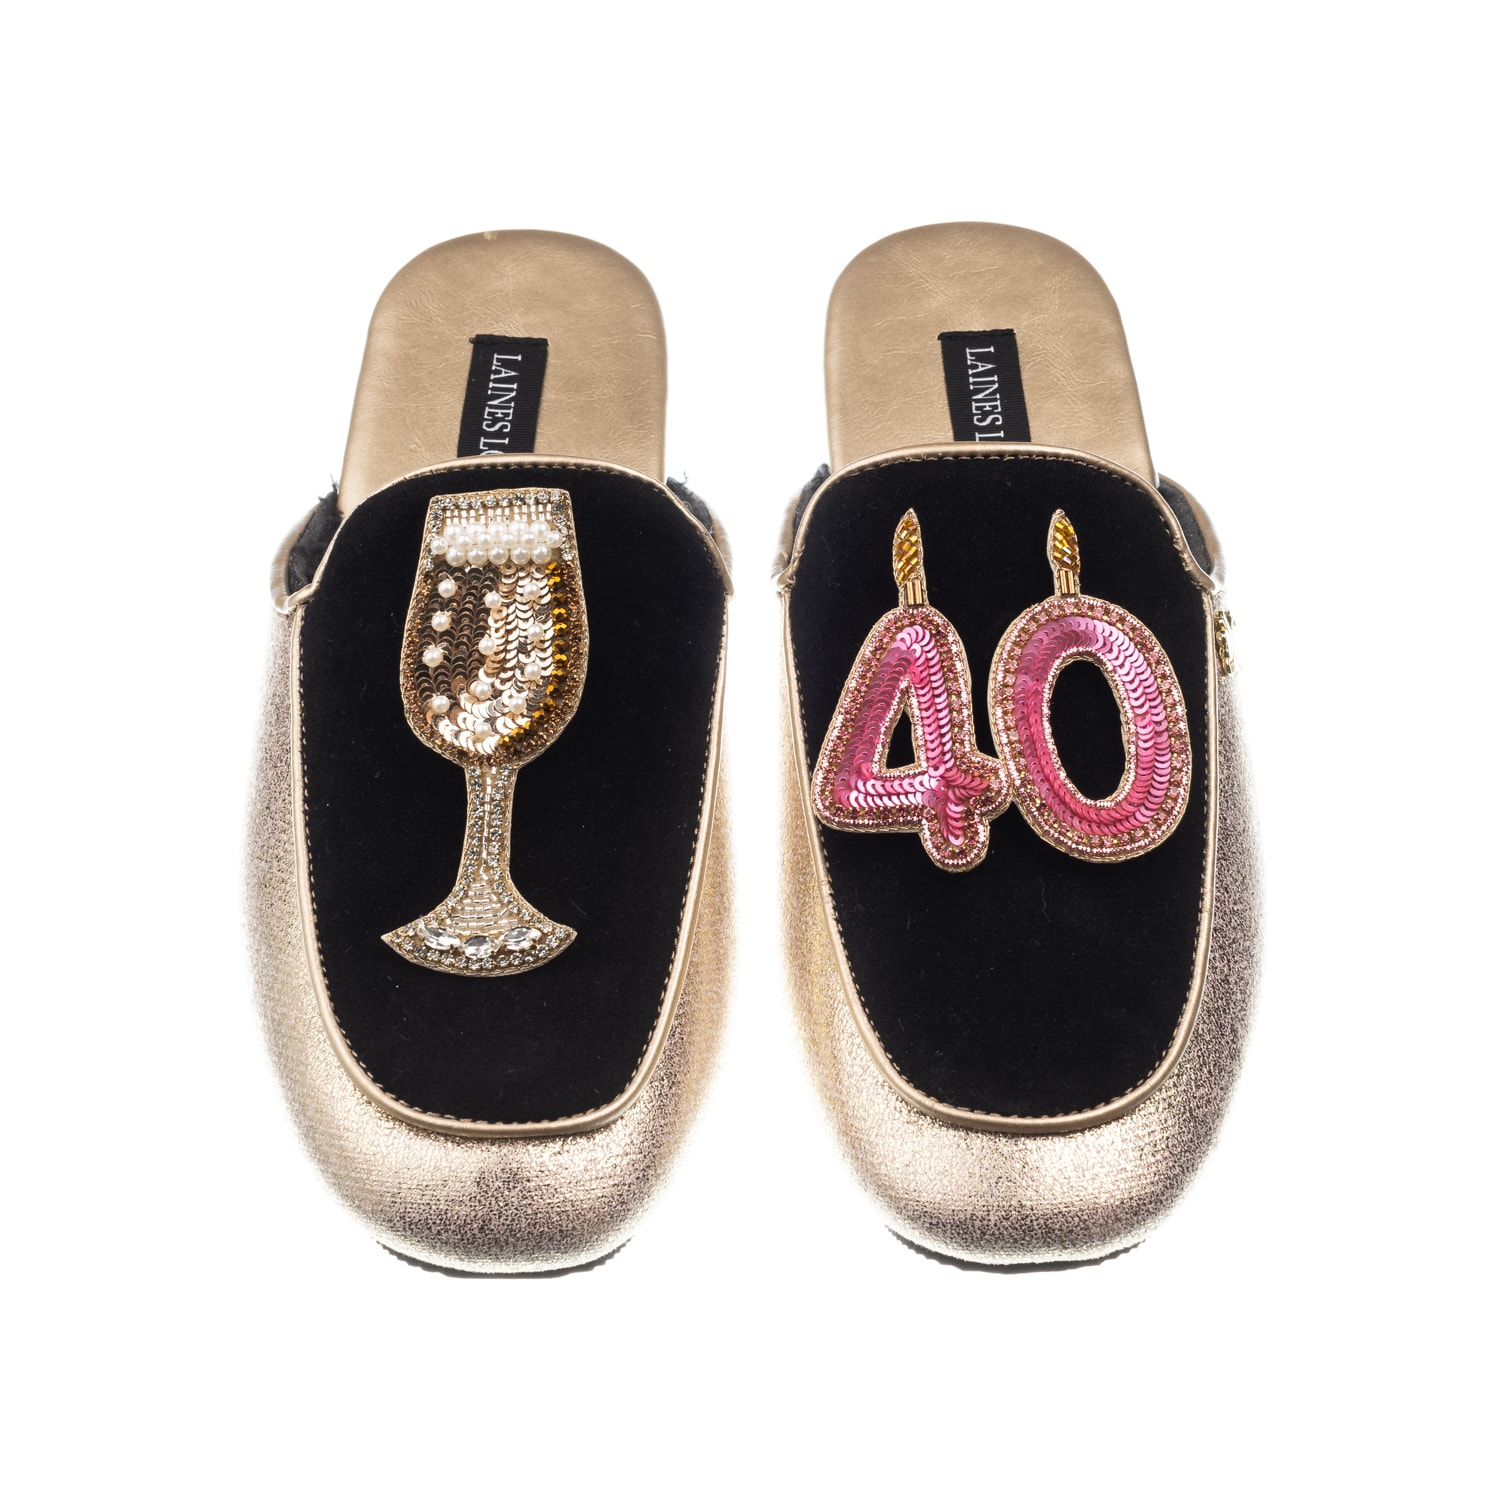 Laines London Women's Black / Gold Classic Mules With 40th Birthday & Glass Of Champagne Brooches - Black & Gold In Multi